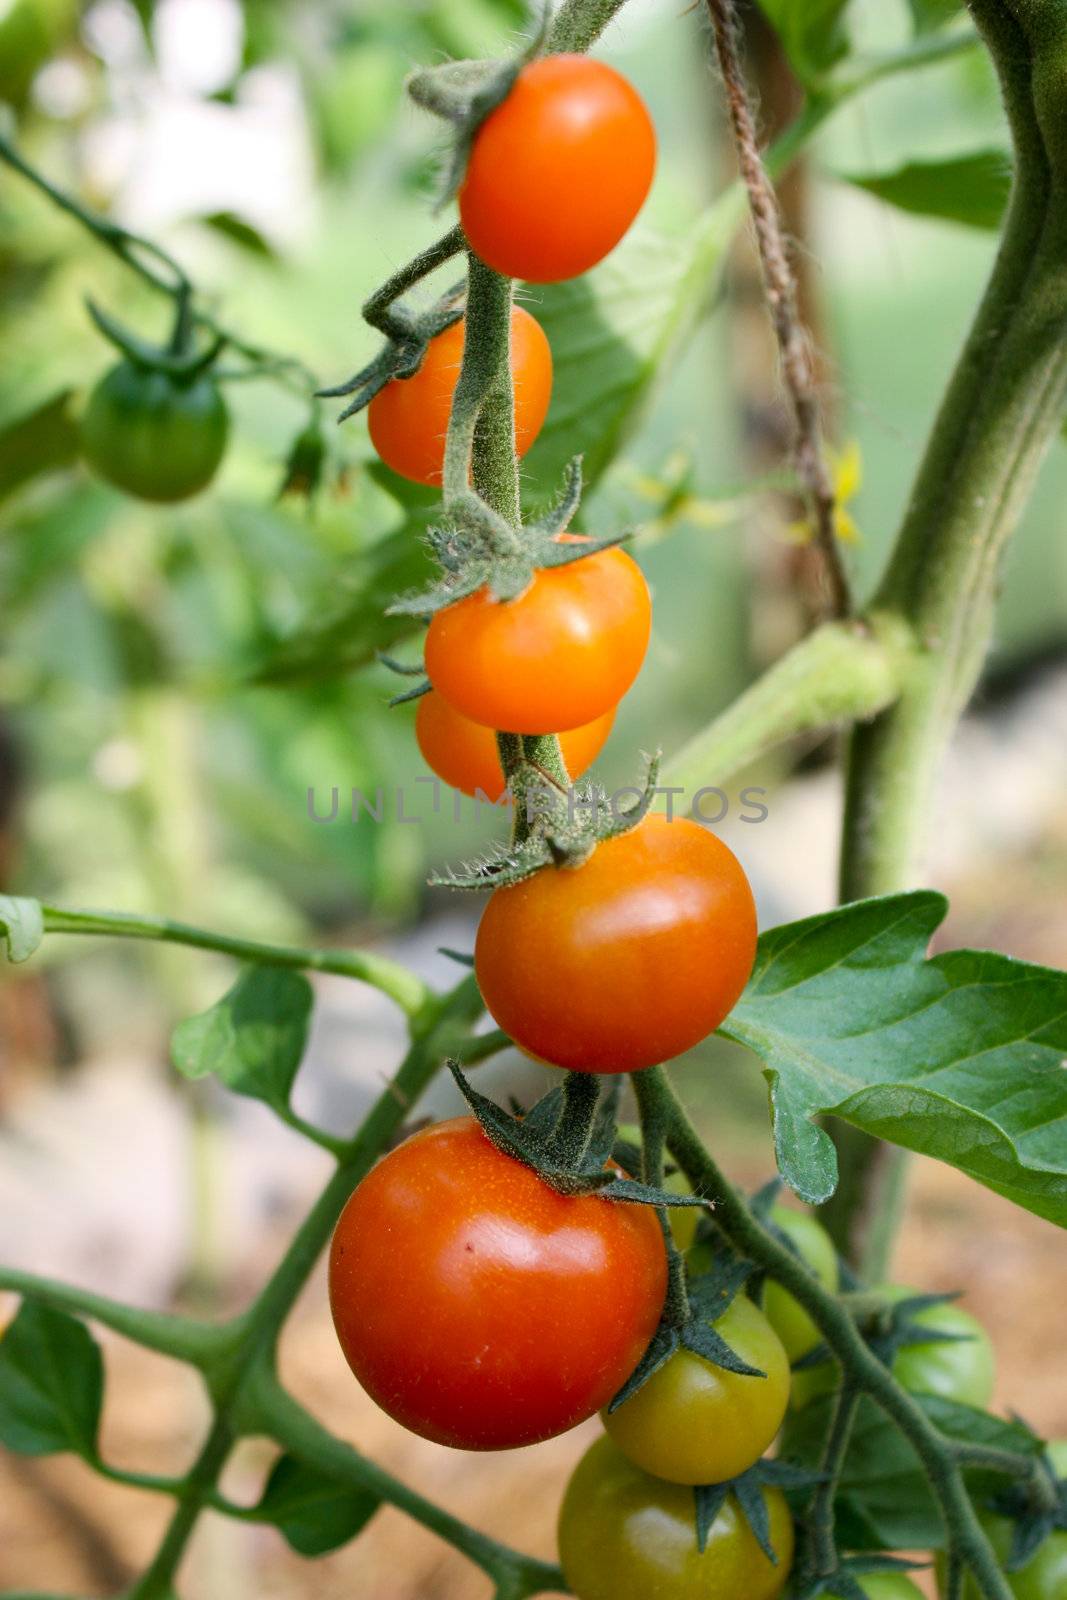 tomatoes on a branch, red tomatoes, green tomatoes, ripe and unripe, ripening tomatoes, new crop, grow tomatoes, hang on a branch, fresh tomatoes